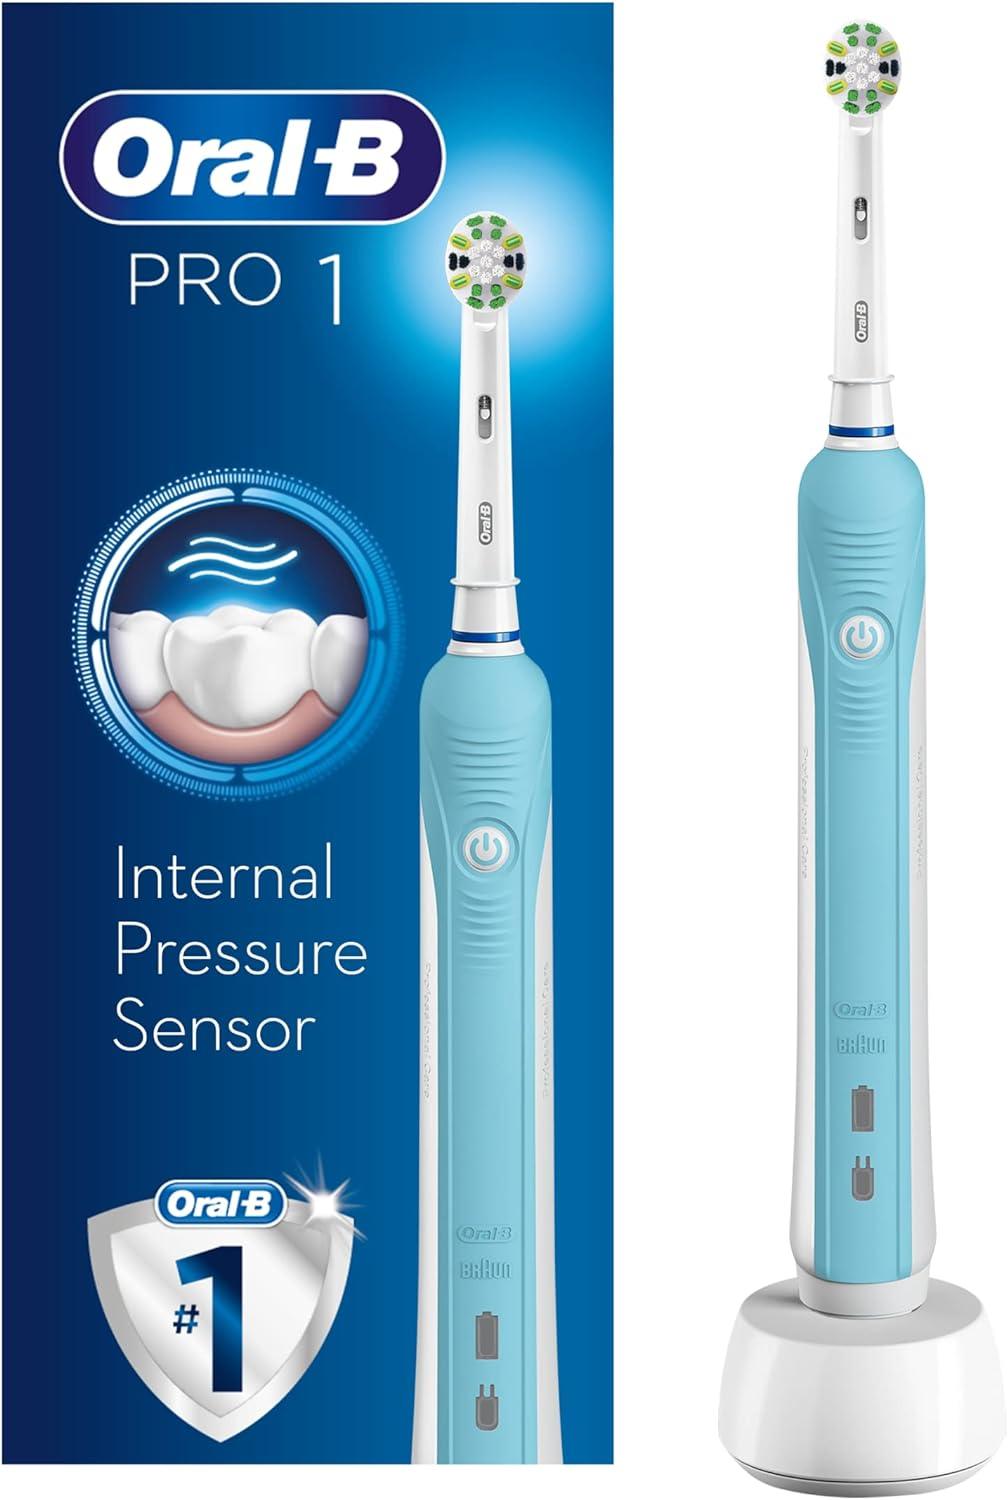 Oral-B Pro 1 Electric Toothbrush with Pressure Sensor - Wellness Shoppee